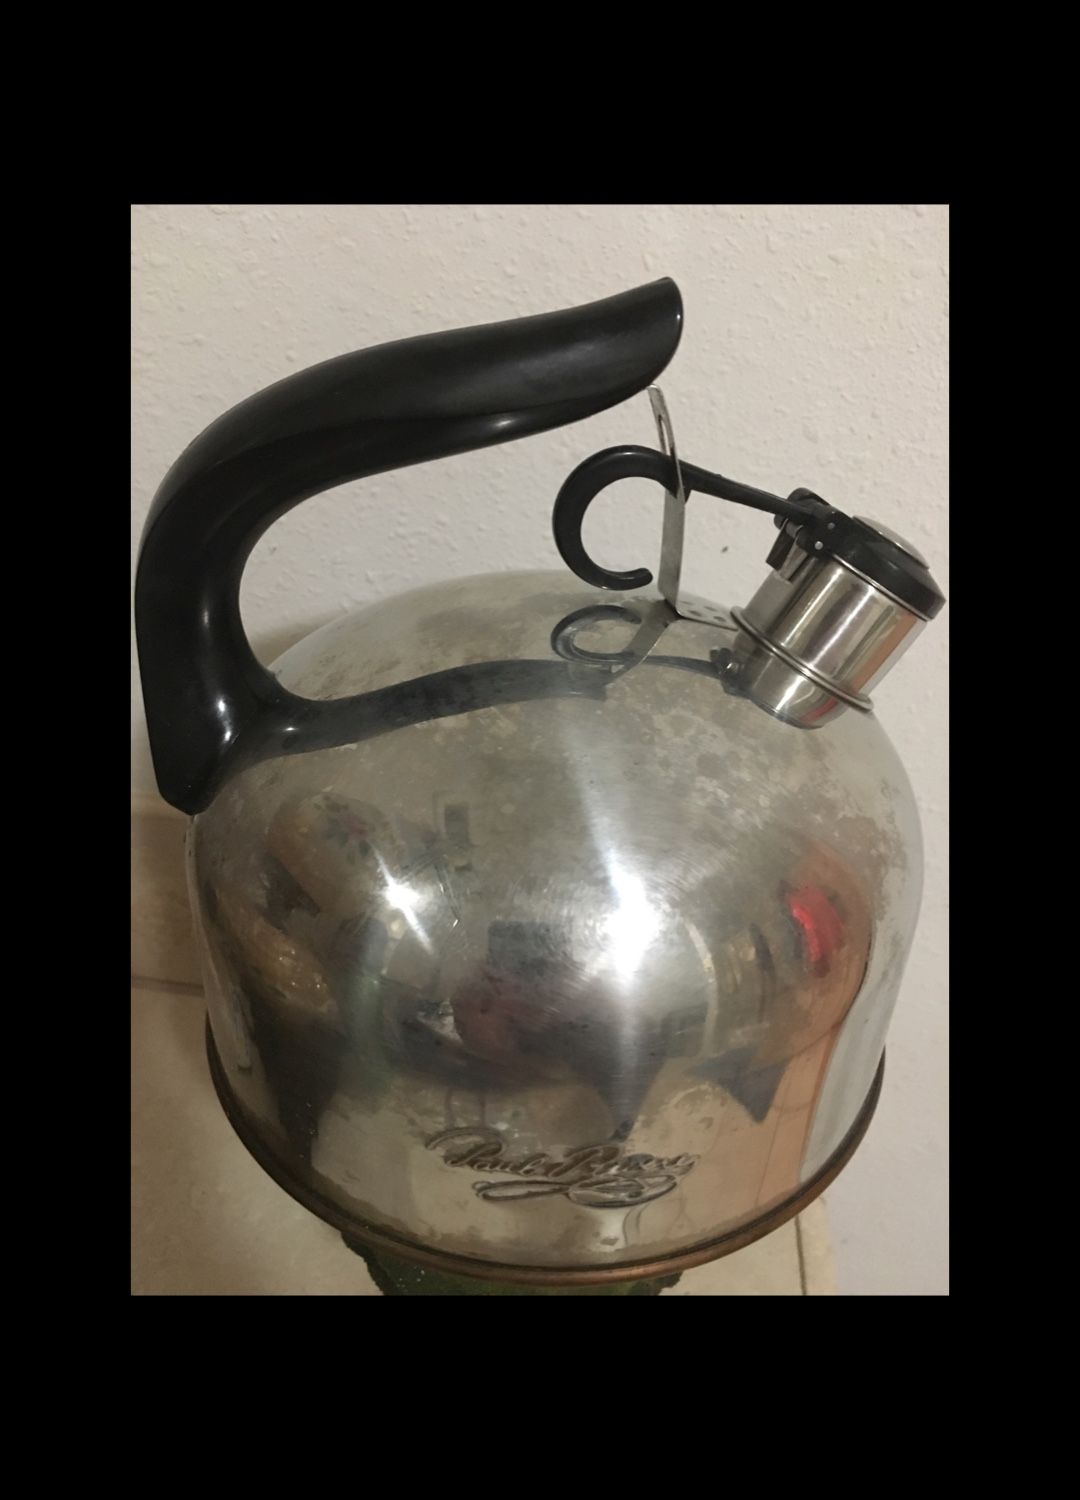 Vintage Paul Revere Ware Copper Bottom Whistling 2.5 Quart Tea Kettle Pot g 95-C. Condition is Used. Shipped with USPS Priority Mail.